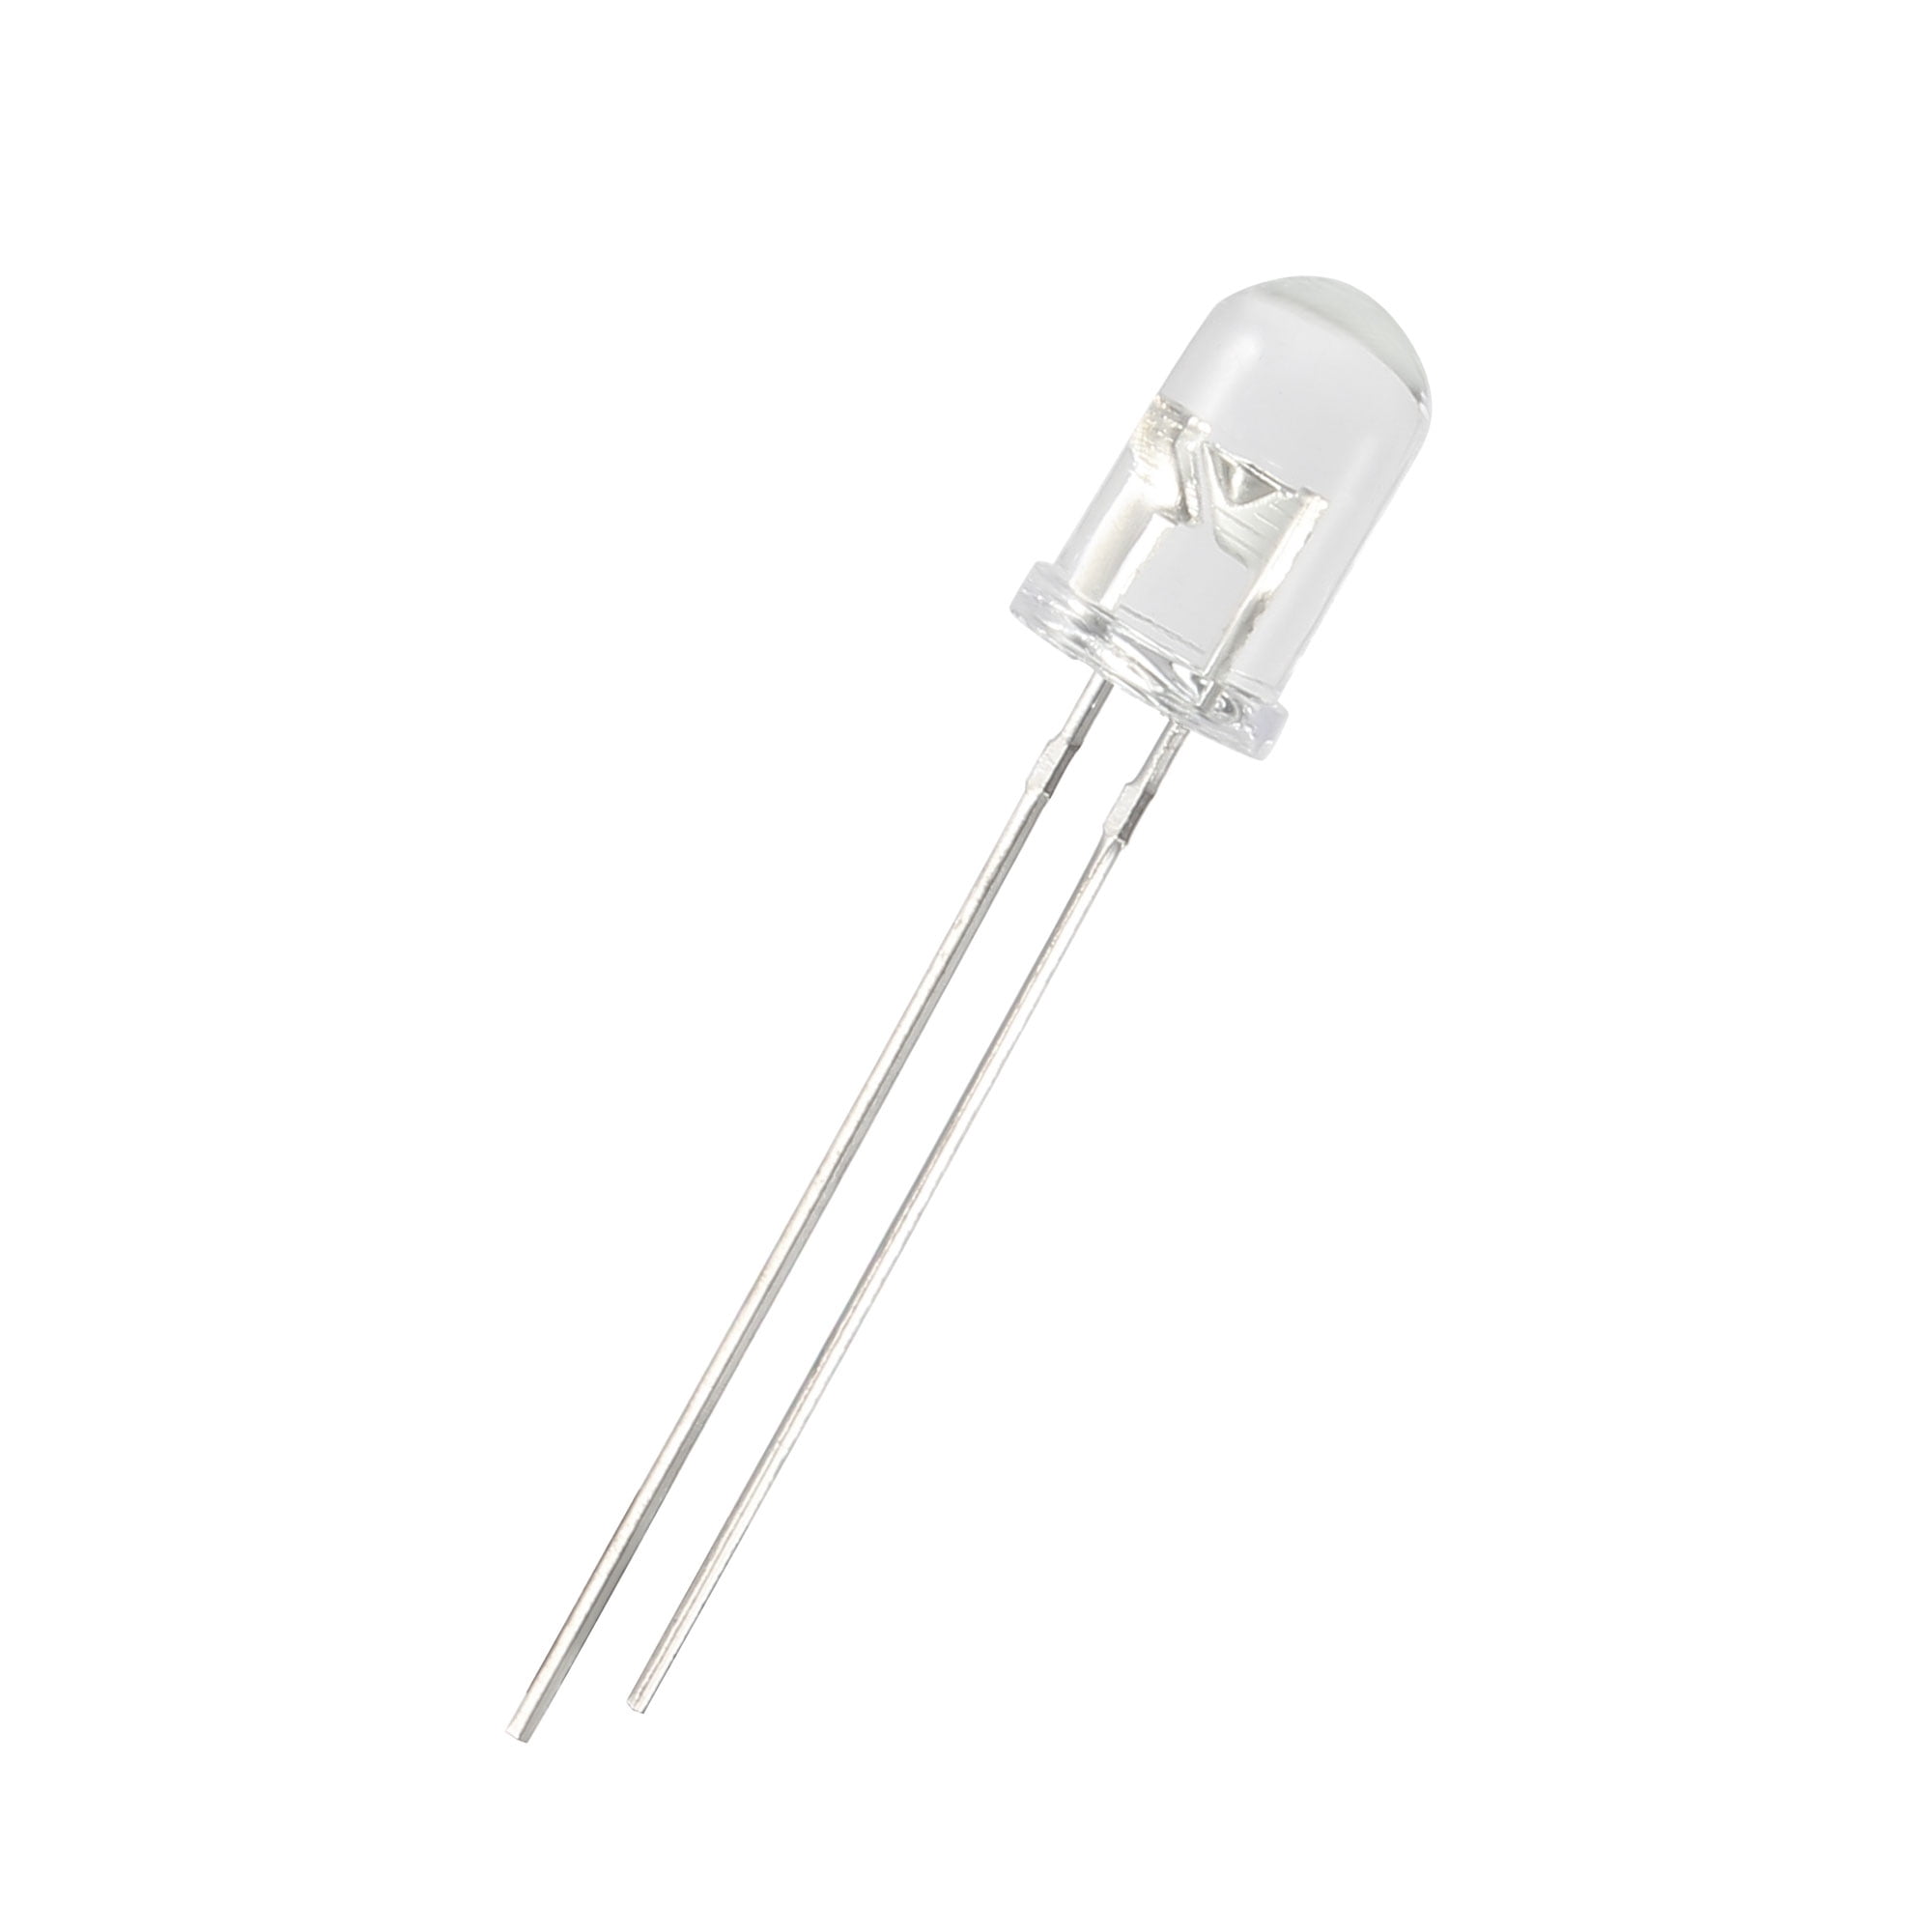 50pcs 5mm 940nm IR Infrared Diode Launch Emitter Receive Receiver LED